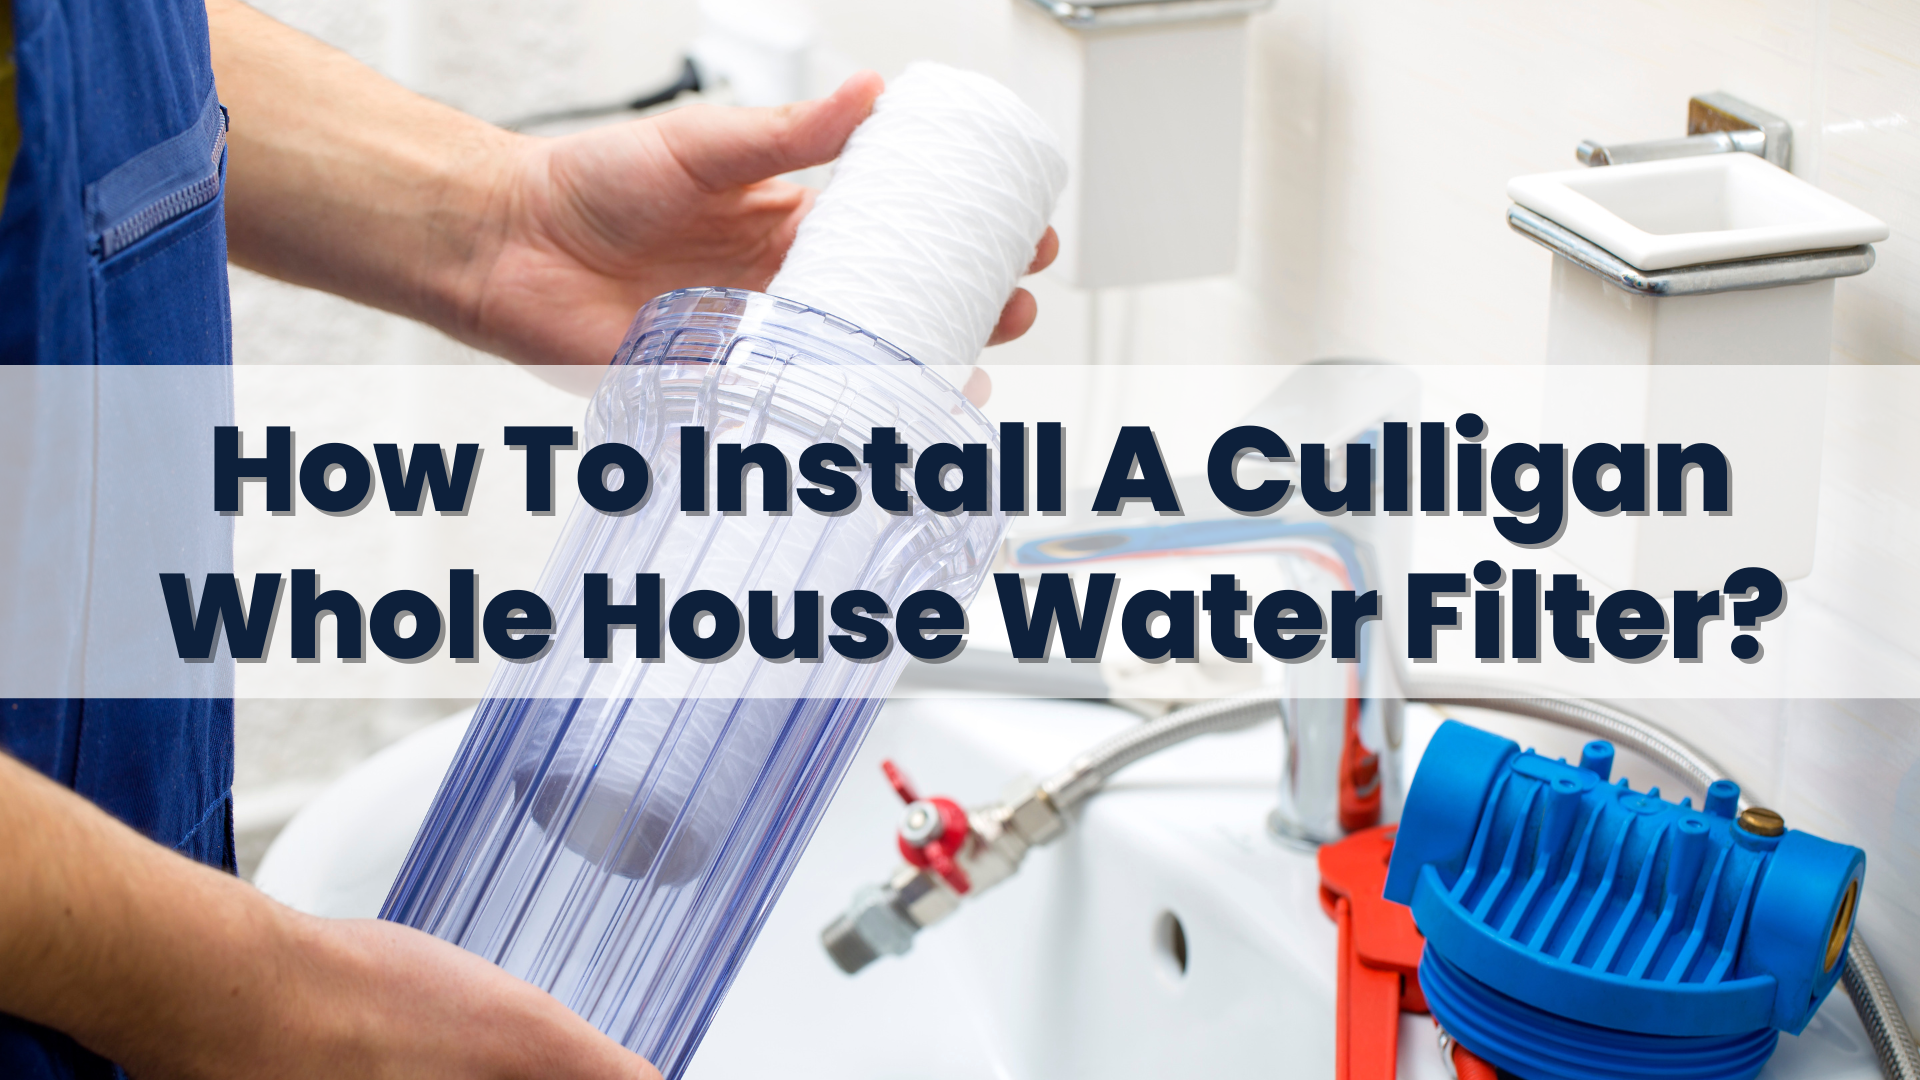 How To Install A Culligan Whole House Water Filter